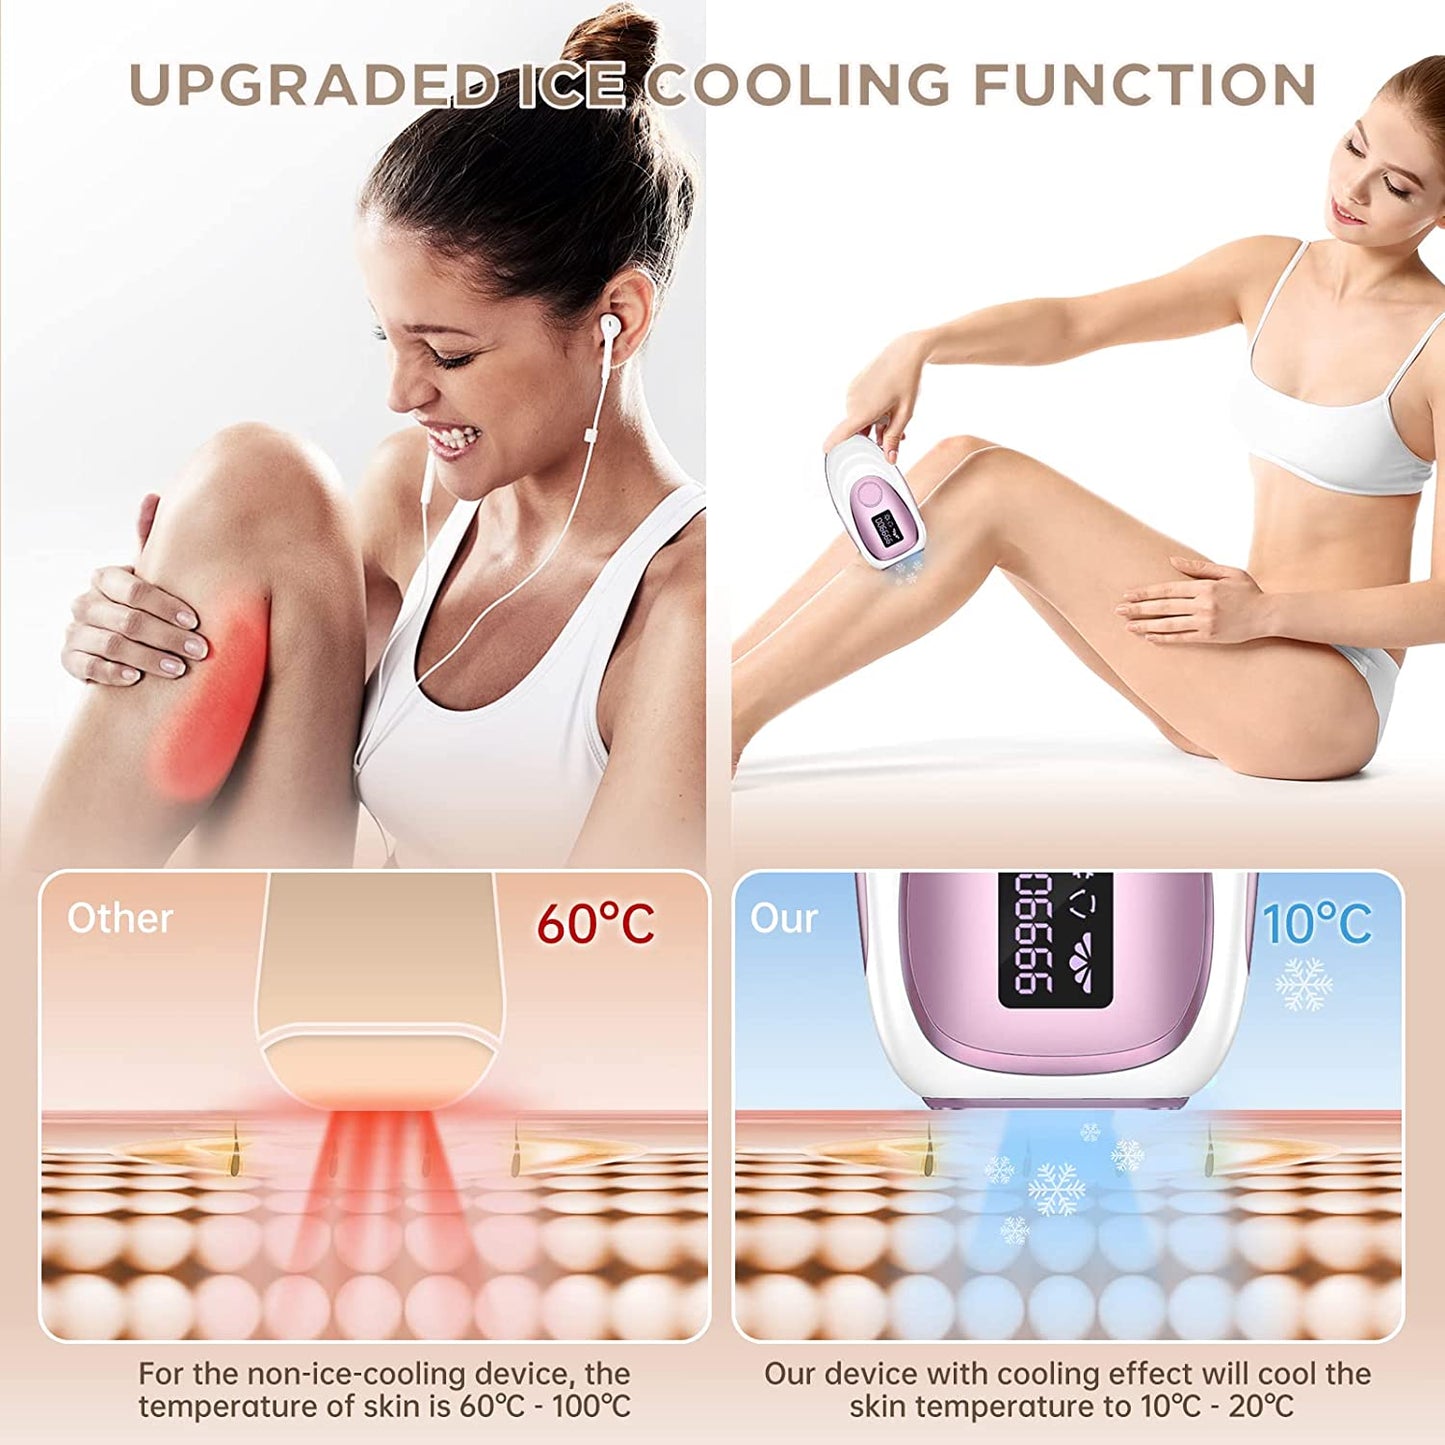 IPL Hair Removal System,999,000 Flashes,Ice Cooling Function,Permanent & Painless Laser Hair Remover,5 Energy,Manual & Auto Modes for Men and Women, Body, Face, Bikini Zone